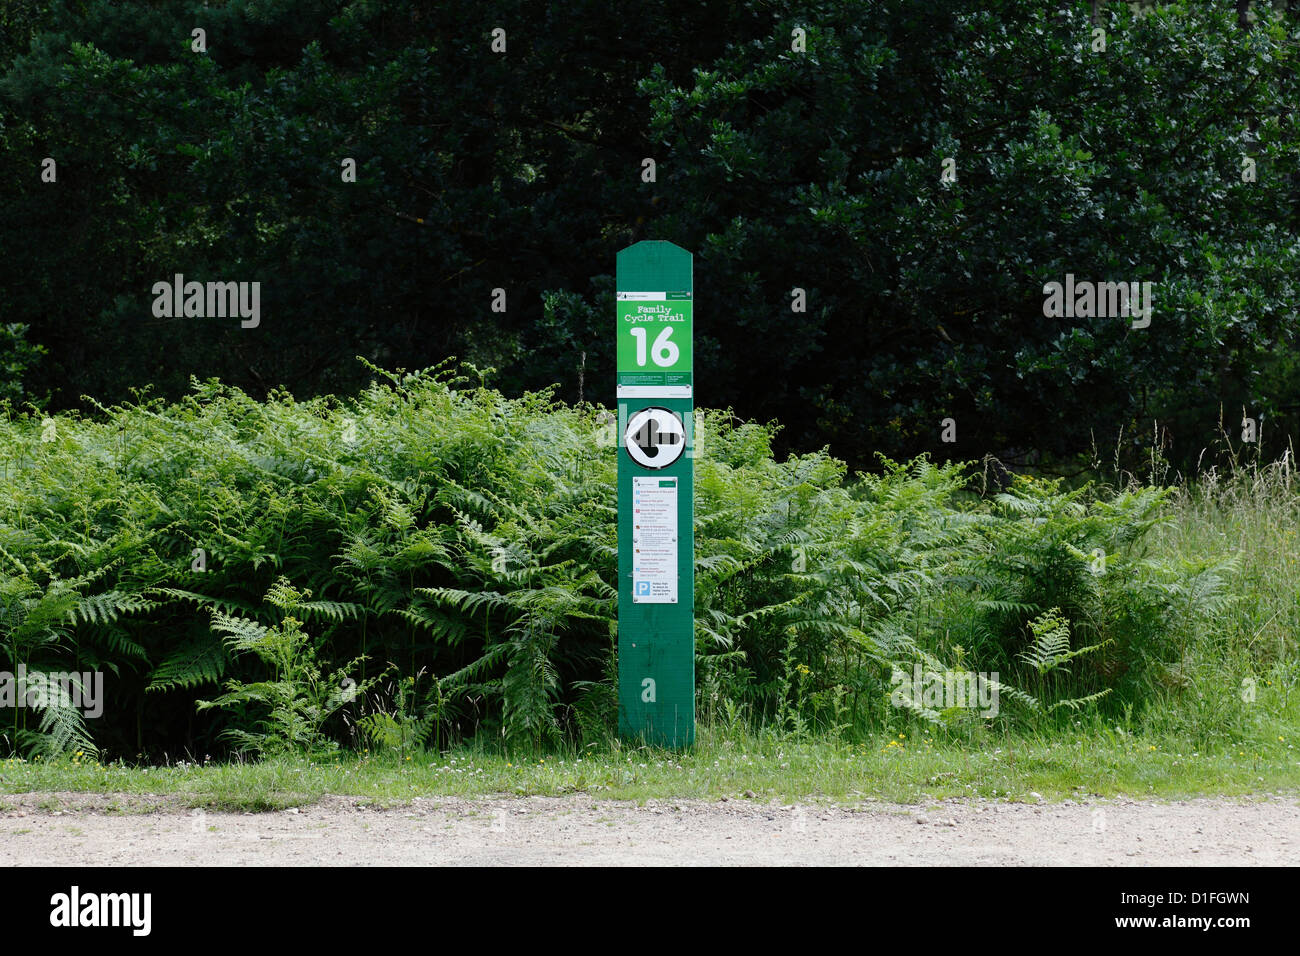 An information point and directions on a Cycle Trail, Sherwood Pines Forest Park, Nottingham, England, UK Stock Photo